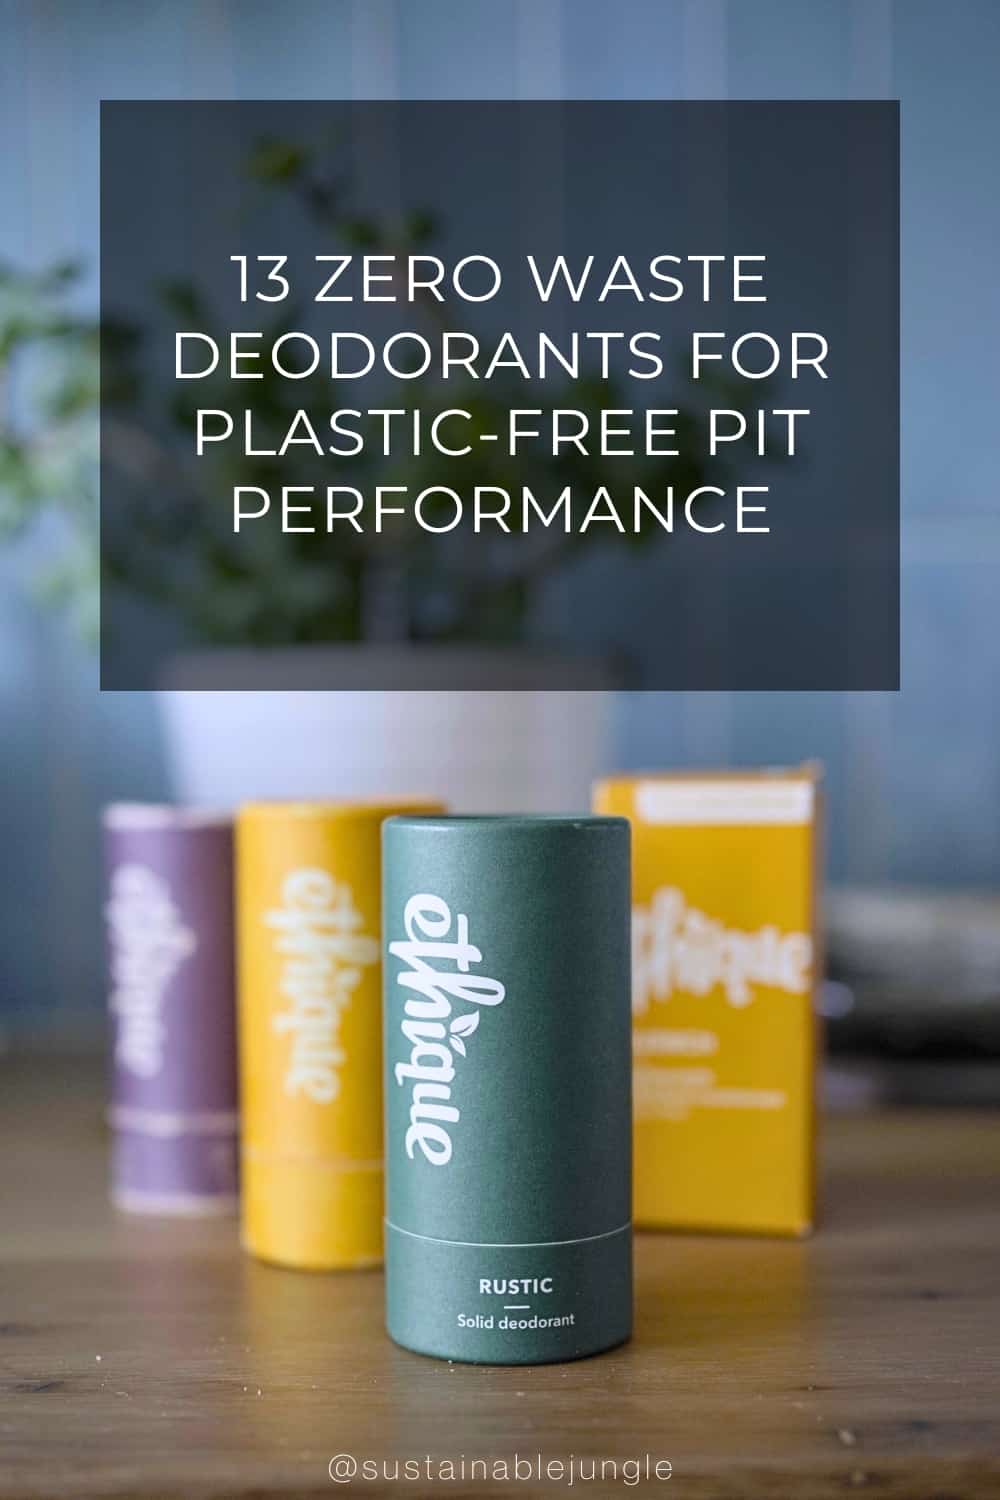 13 Zero Waste Deodorants For Plastic-Free Pit Performance Image by Sustainable Jungle #zerowastedeodorant #bestzerowastedeodorant #zerowastedeodorantrecipe #plasticfreedeodorant #plasticfreenaturaldeodorant #bestplasticfreedeodorant #sustainablejungle